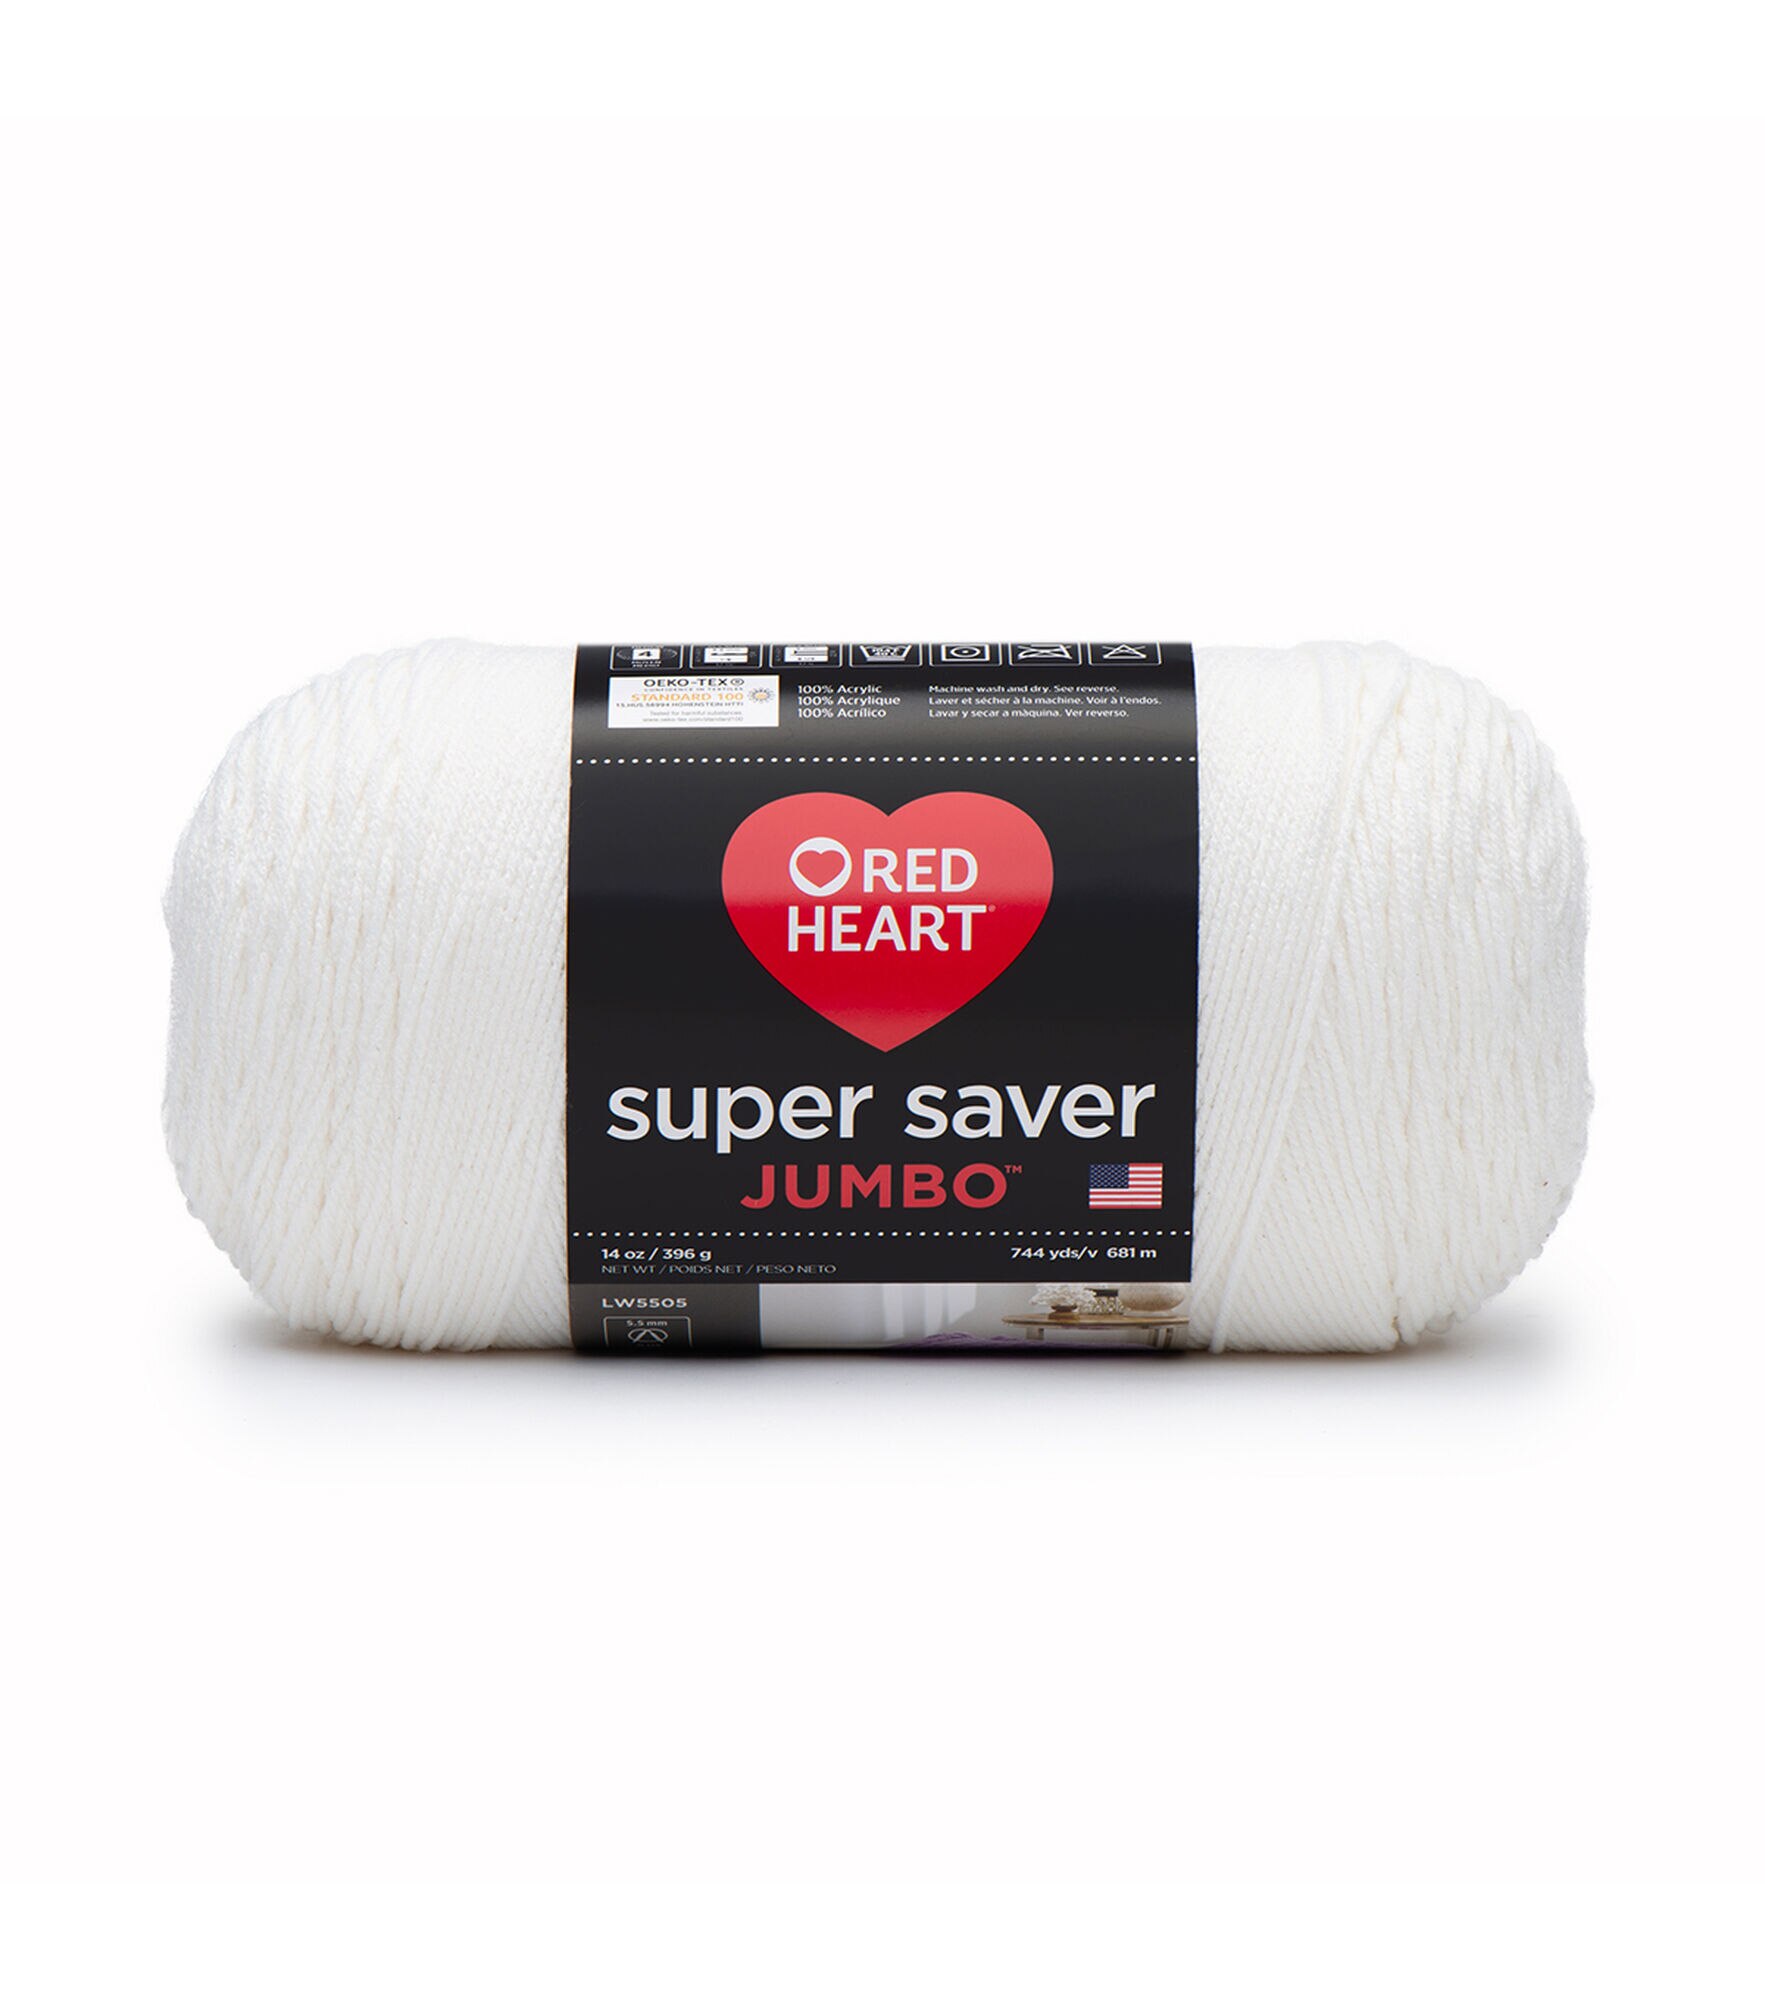 Red Heart Super Saver Jumbo Yarn-Spring Green, 1 count - Dillons Food Stores